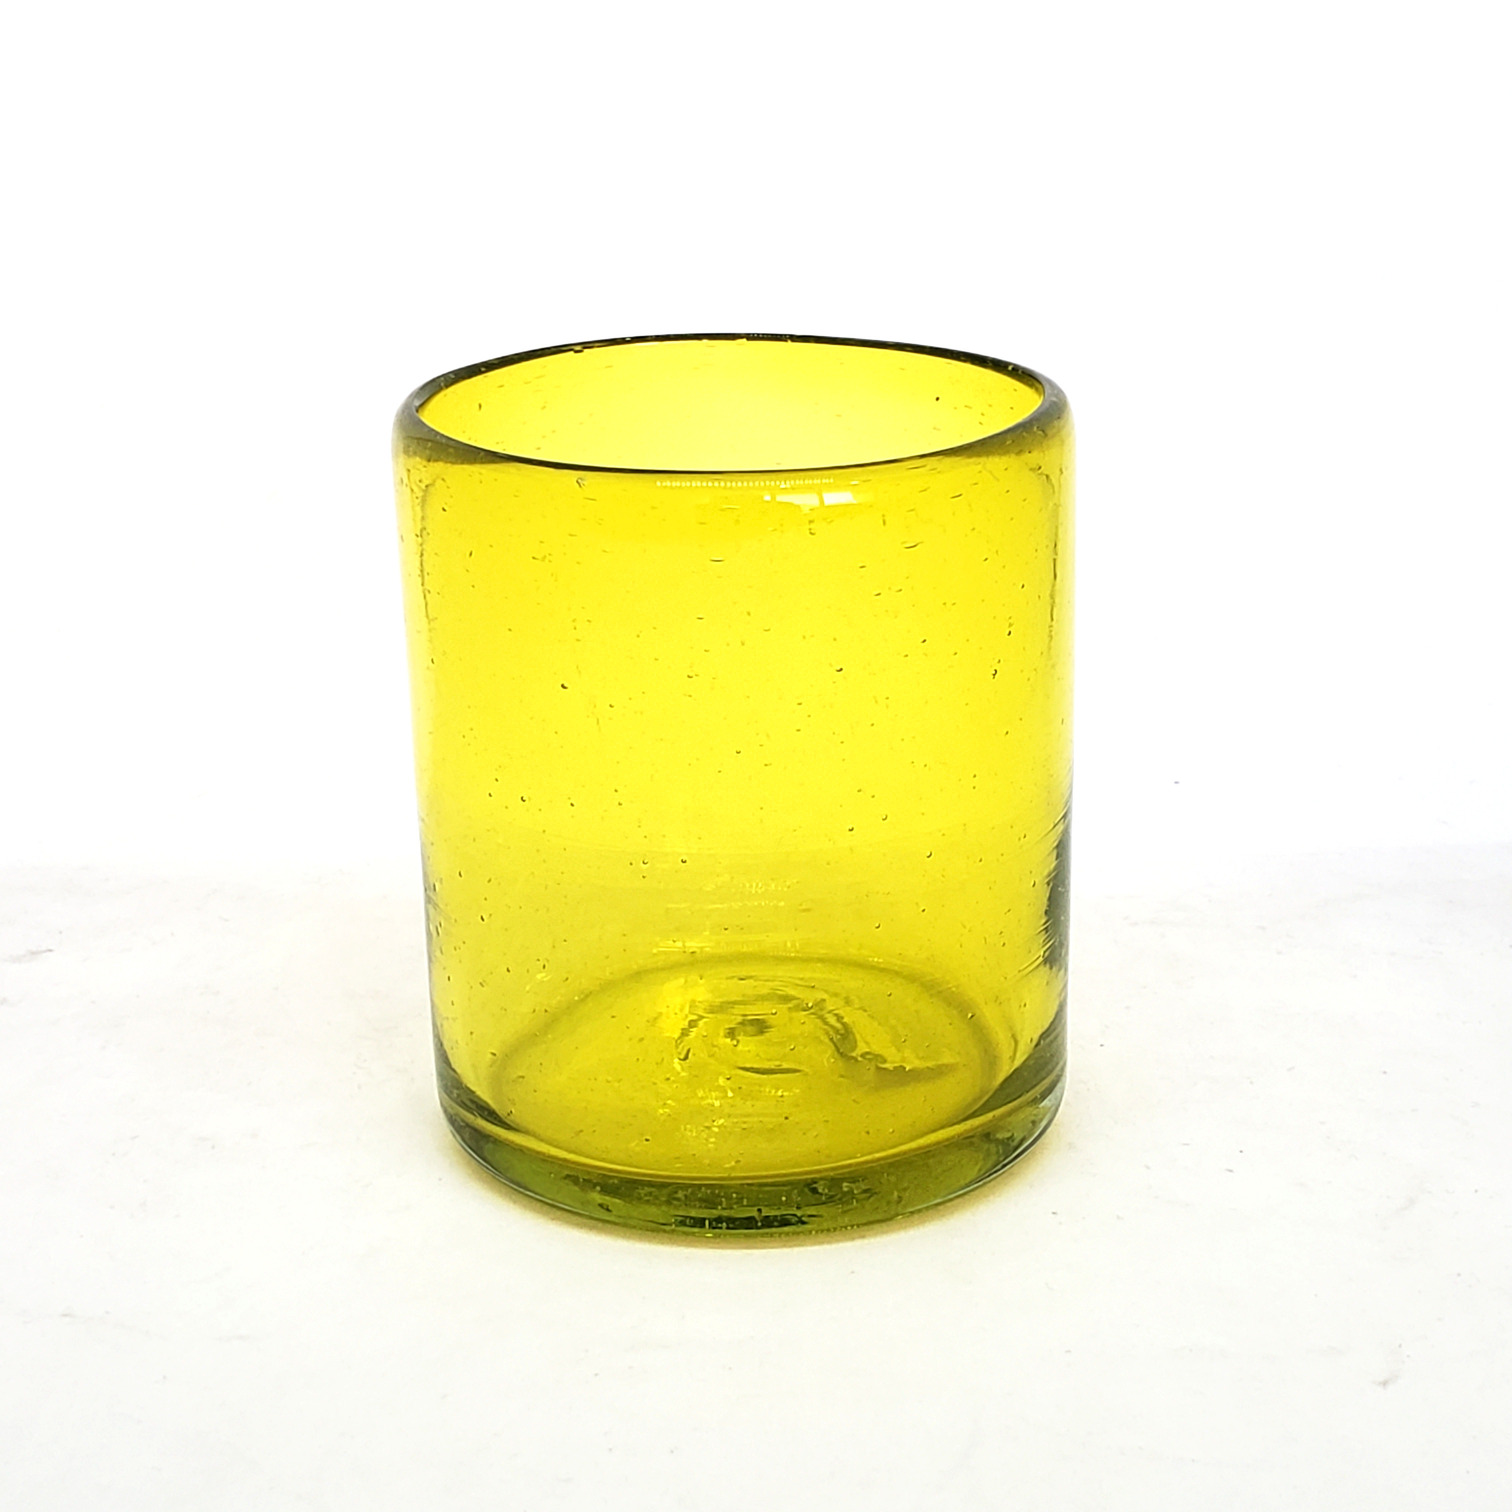 Wholesale Colored Glassware / Solid Yellow 9 oz Short Tumblers  / Enhance your favorite drink with these colorful handcrafted glasses.